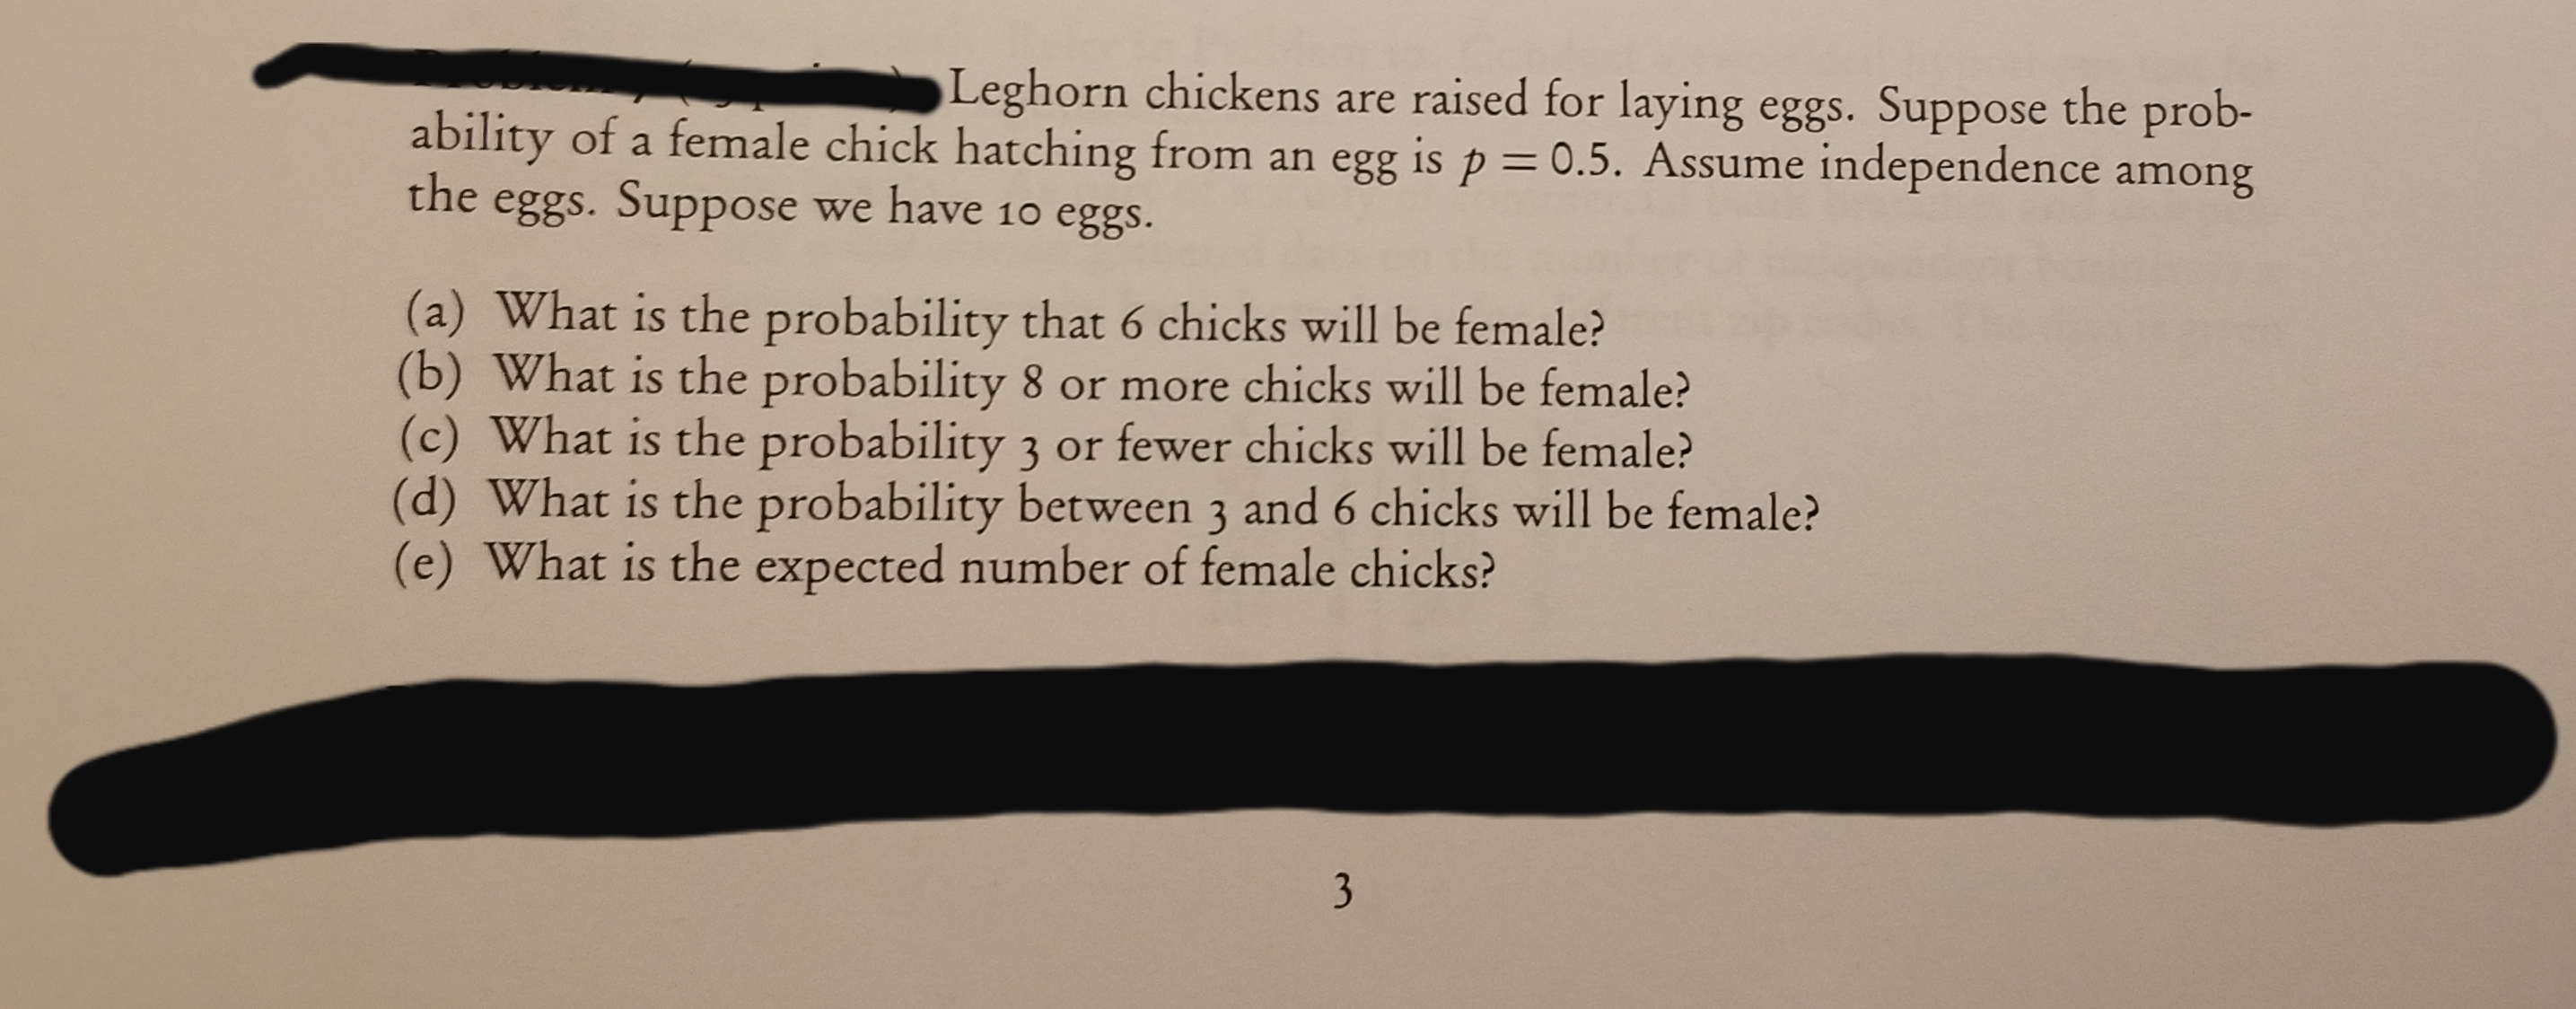 Leghorn chickens are raised for laying eggs. Suppose the prob-
ability of a female chick hatching from an egg is p = 0.5. Assume independence among
the
eggs. Suppose we have 10 eggs.
(a) What is the probability that 6 chicks will be female?
(b) What is the probability 8 or more chicks will be female?
(c) What is the probability 3 or fewer chicks will be female?
(d) What is the probability between 3 and 6 chicks will be female?
(e) What is the expected number of female chicks?
3
